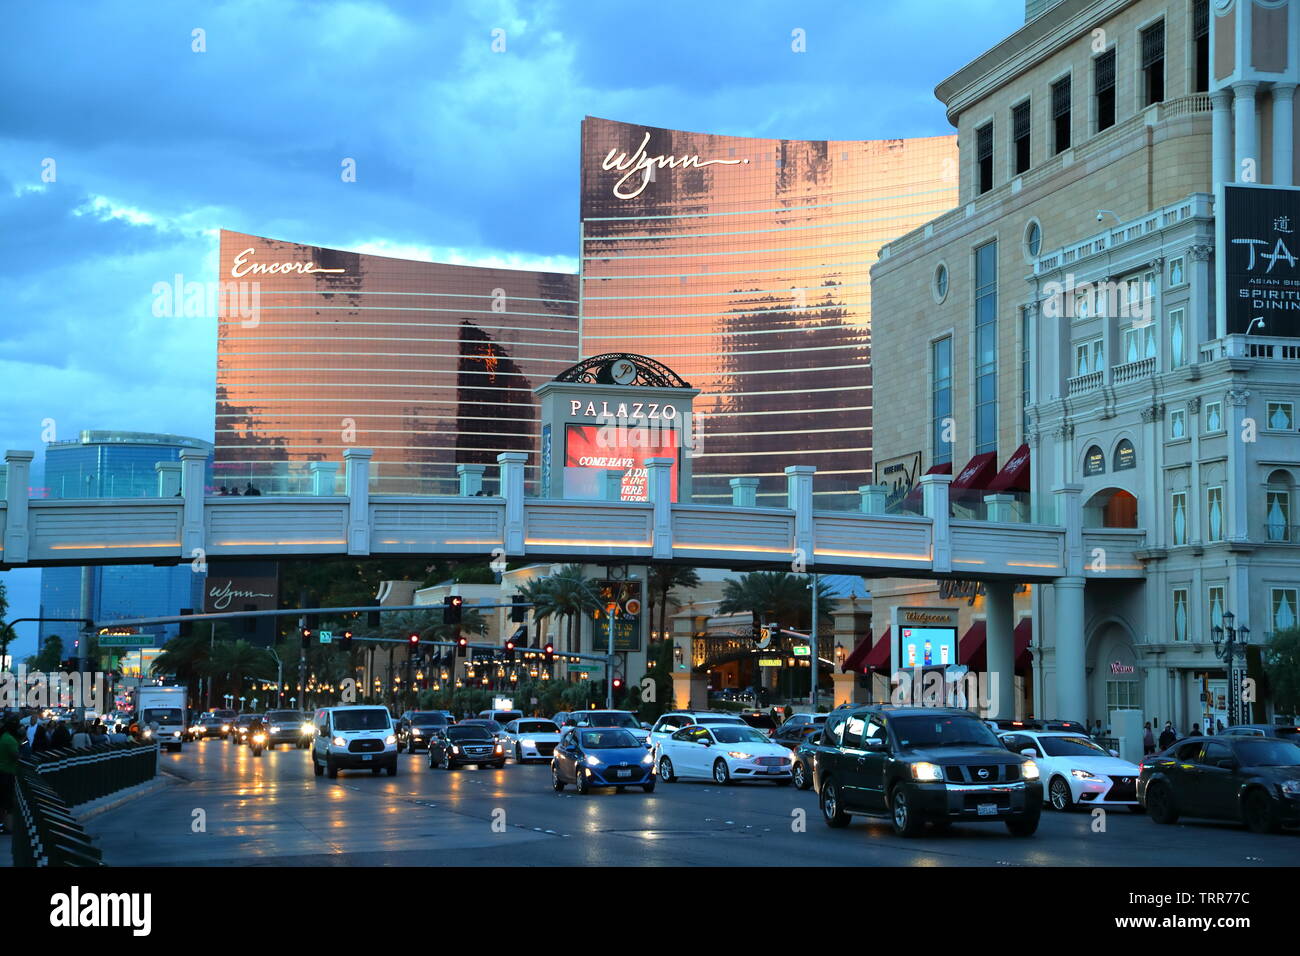 The Wynn and Encore hotel and casino in the evening in Las Vegas, Nevada, USA Stock Photo